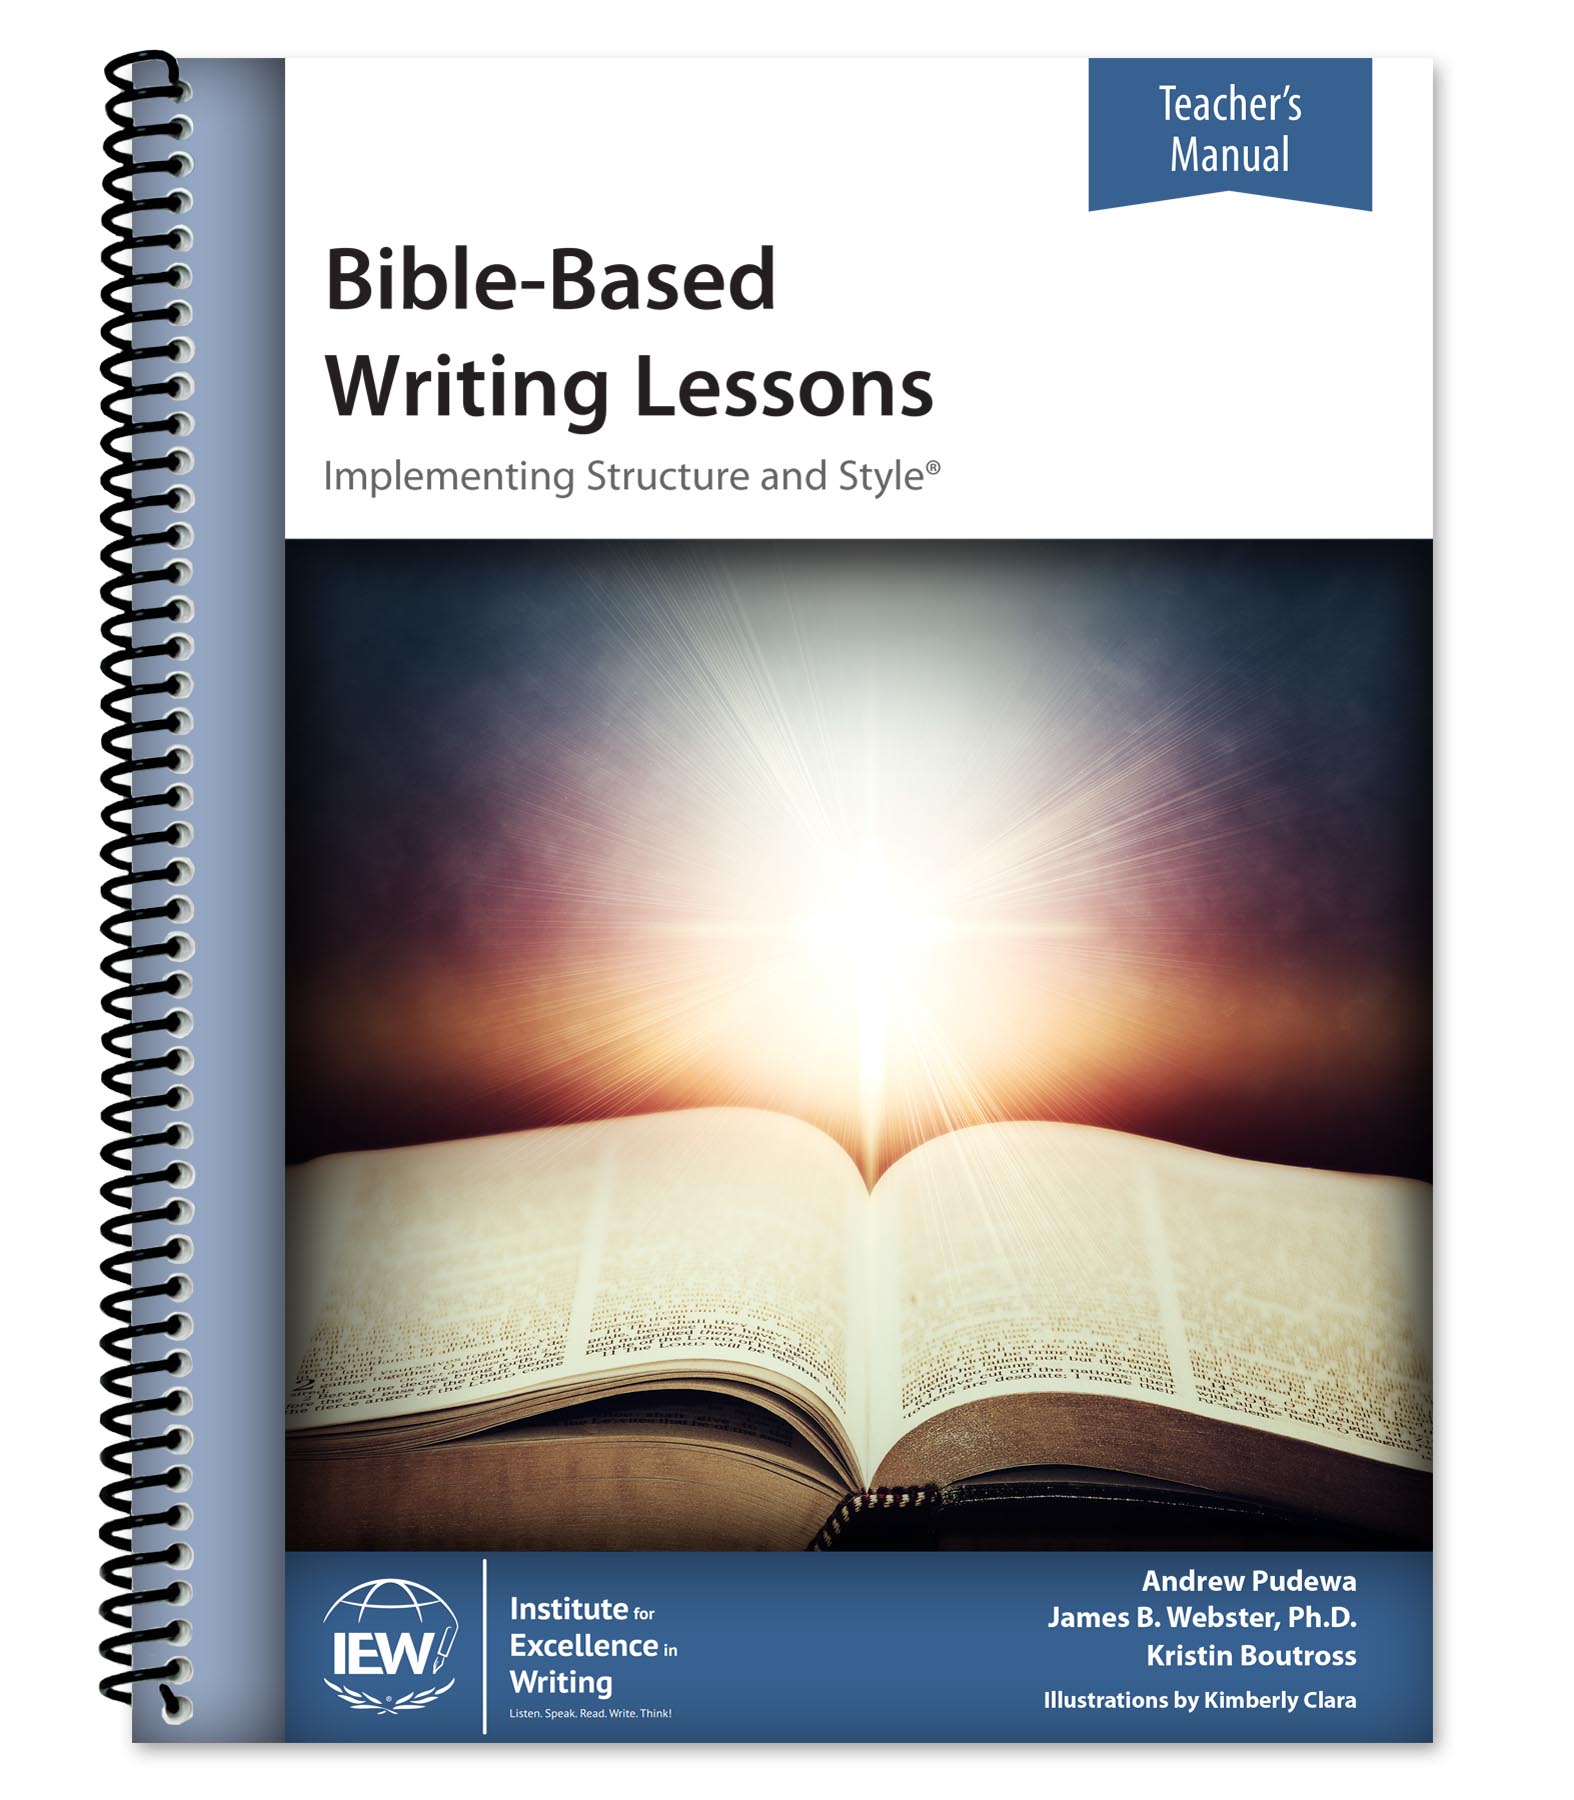 Bible-Based Writing Lessons [Teacher's Manual only] [CLEARANCE]